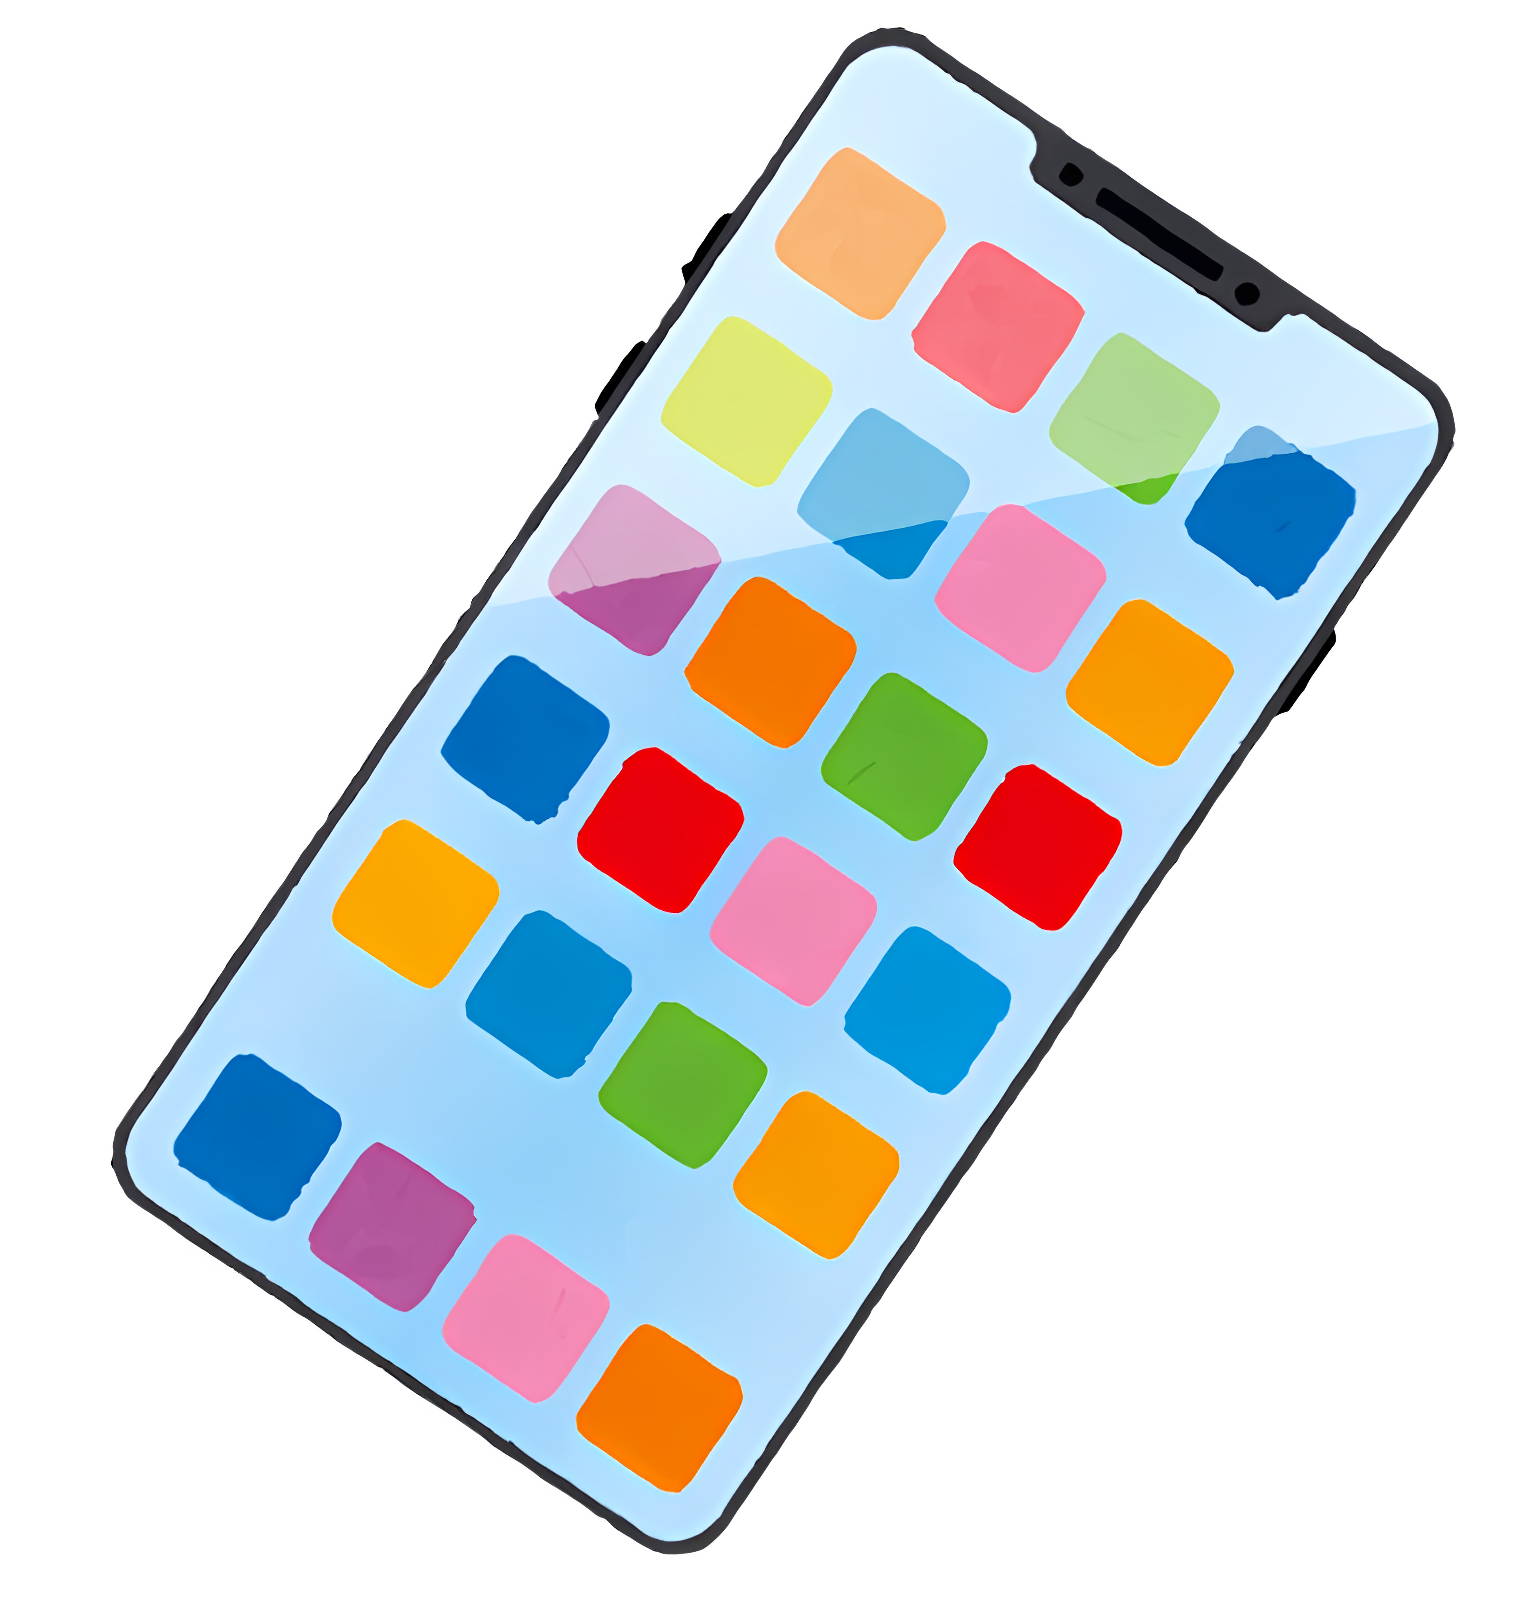 iPhone 6 in black case with colorful icons Clipart